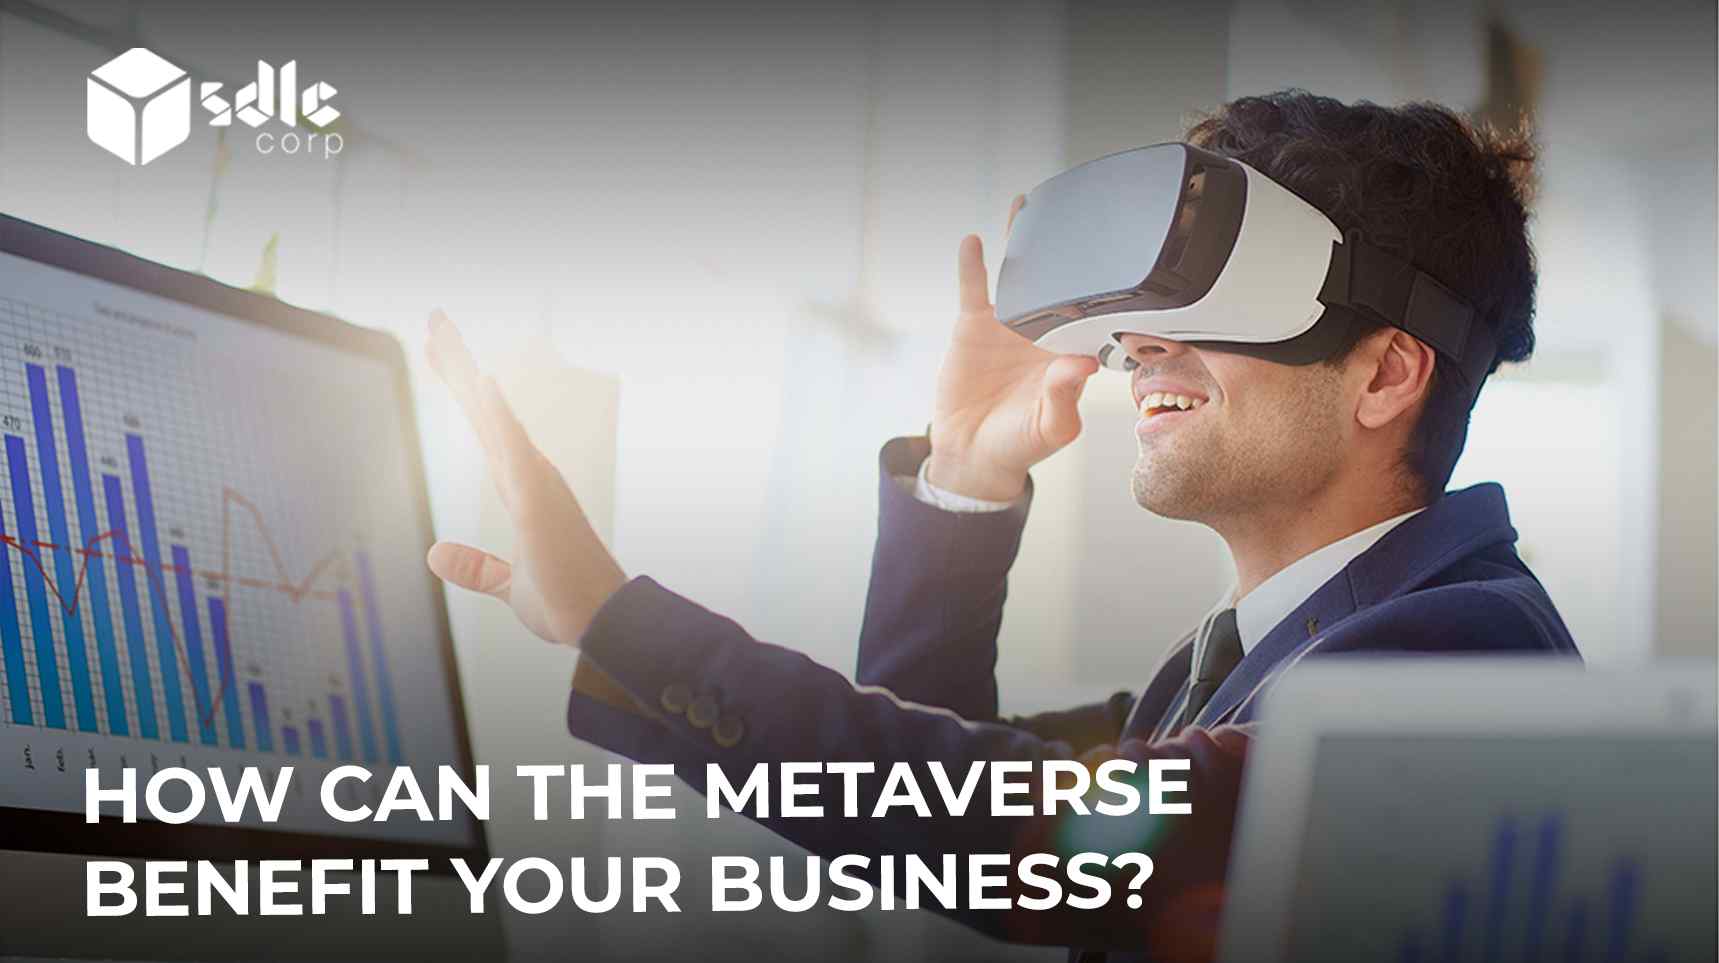 How can the metaverse benefit your business?